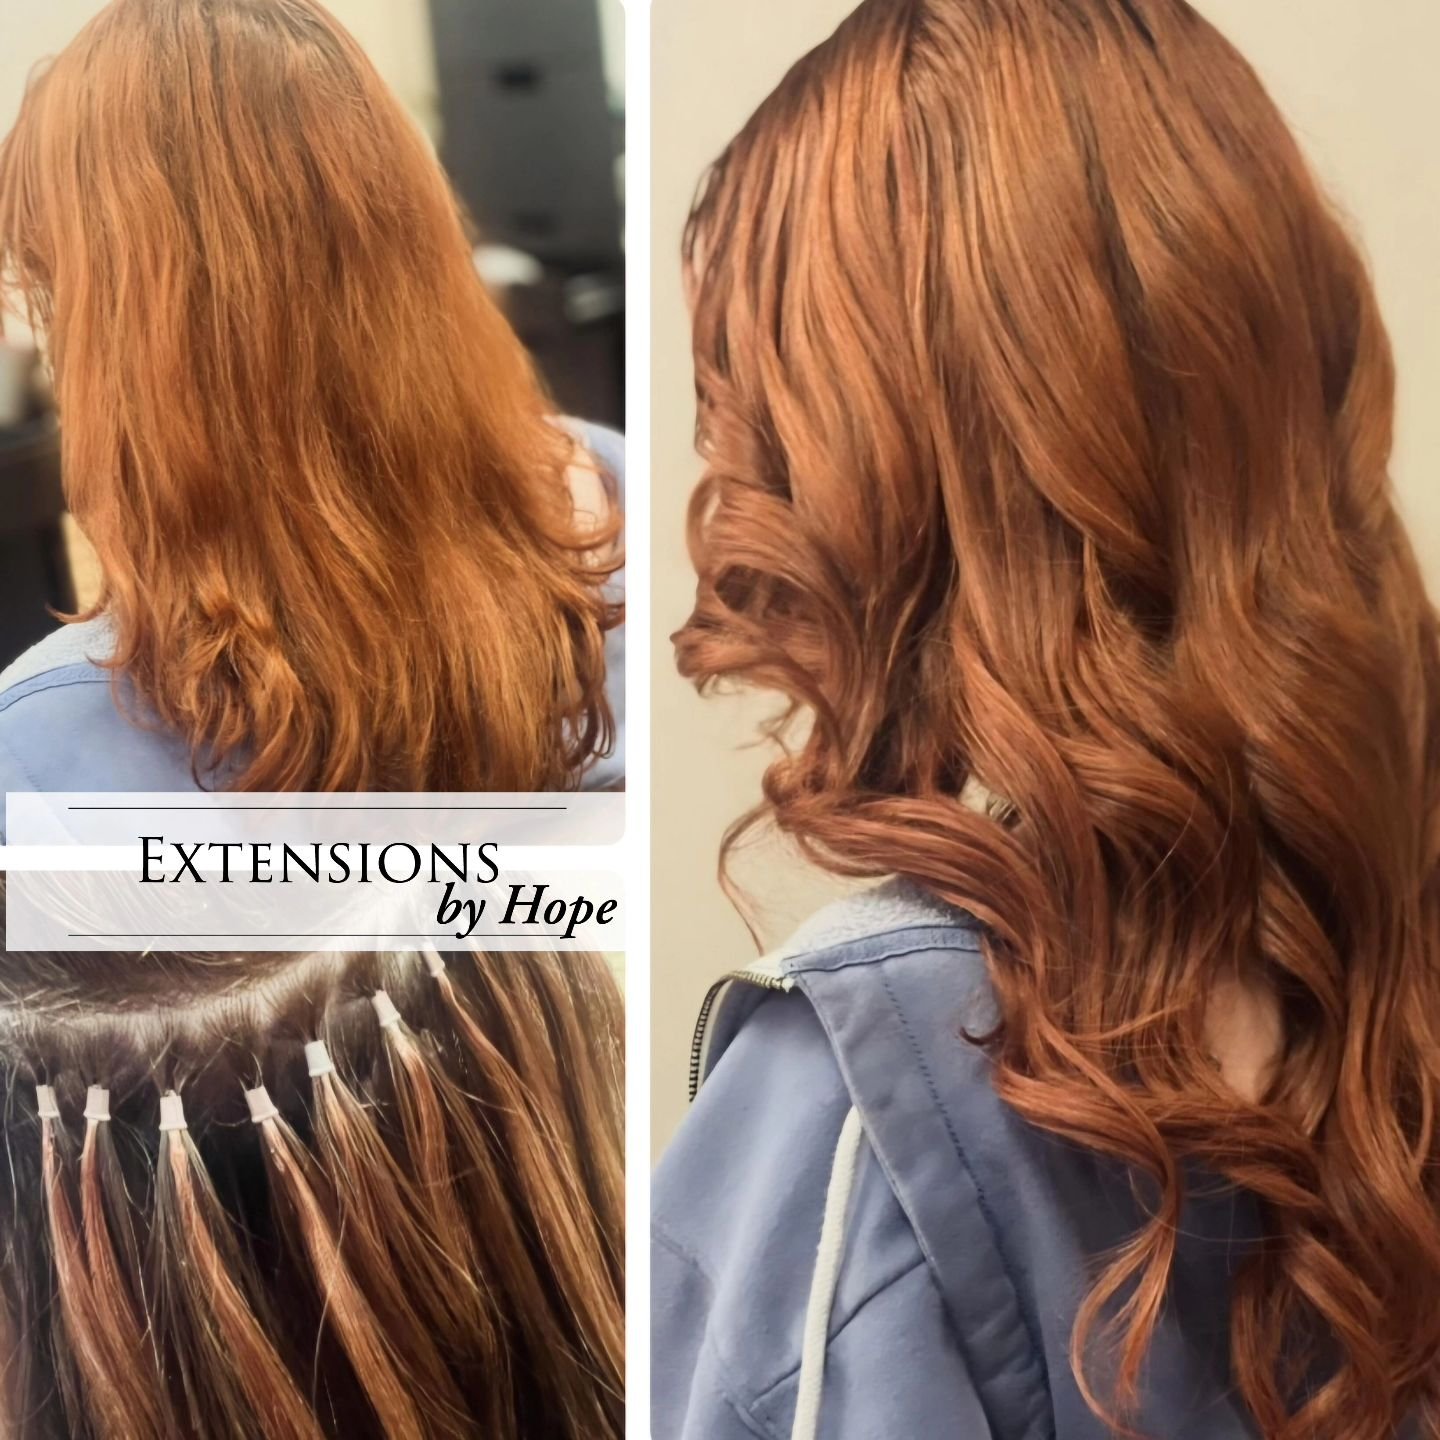 This client got some extensions added to her hair for prom. Our designer and extension specialist, Hope, helped her choose the Itip extensions and color matched her hair for the perfect style. Let Hope or any of our extension specialists help you fin